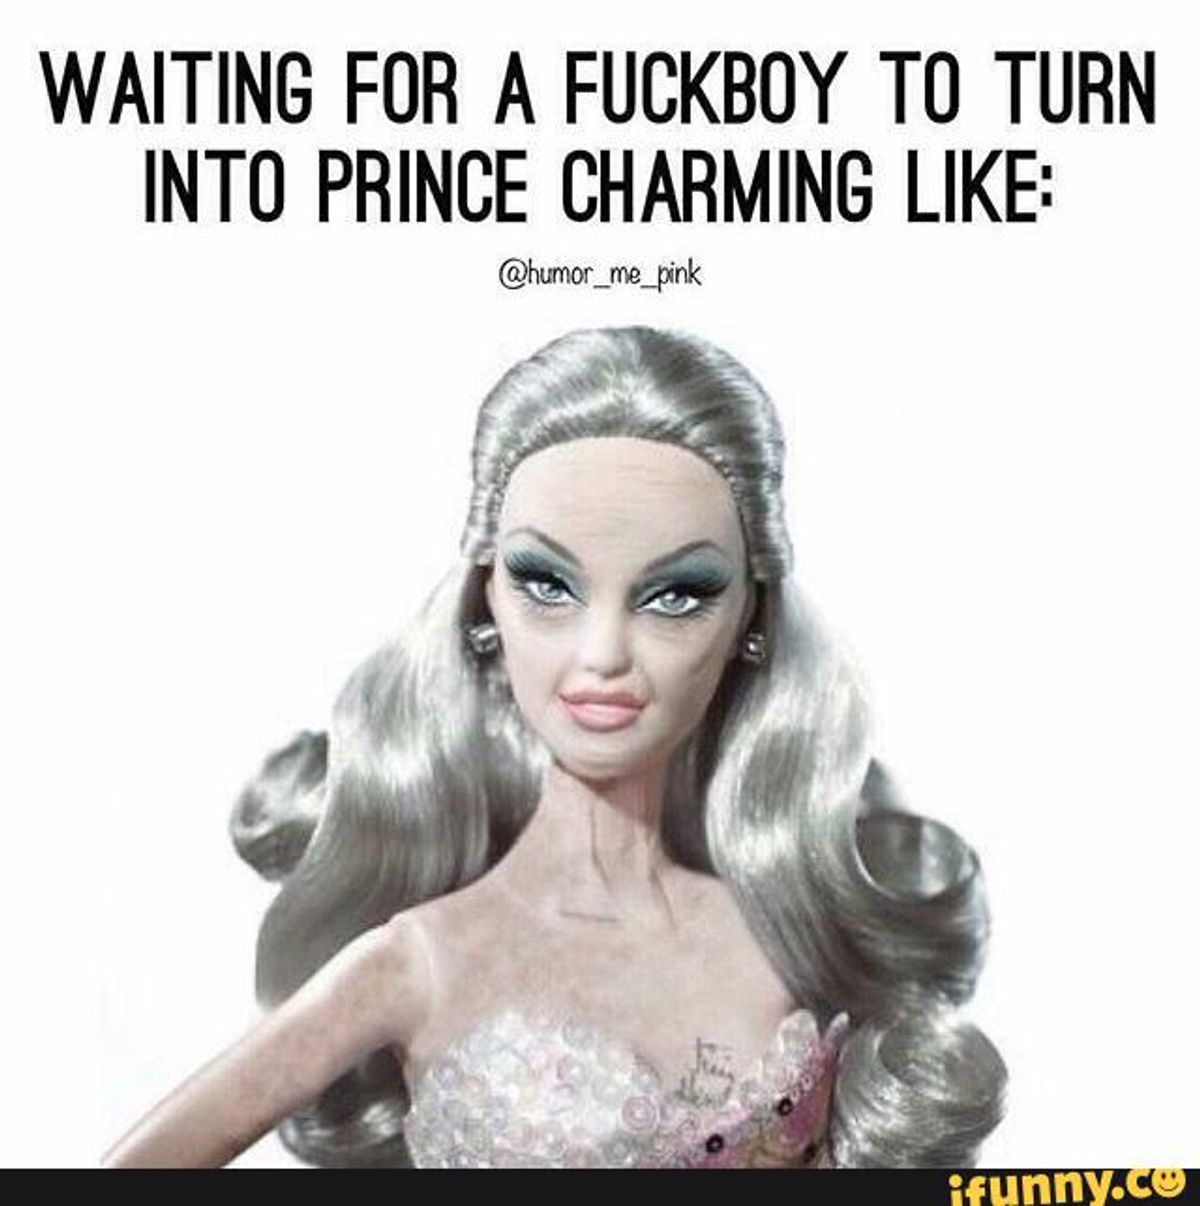 Prince Charming Does Exist. You're Just Dating a F*ckboy